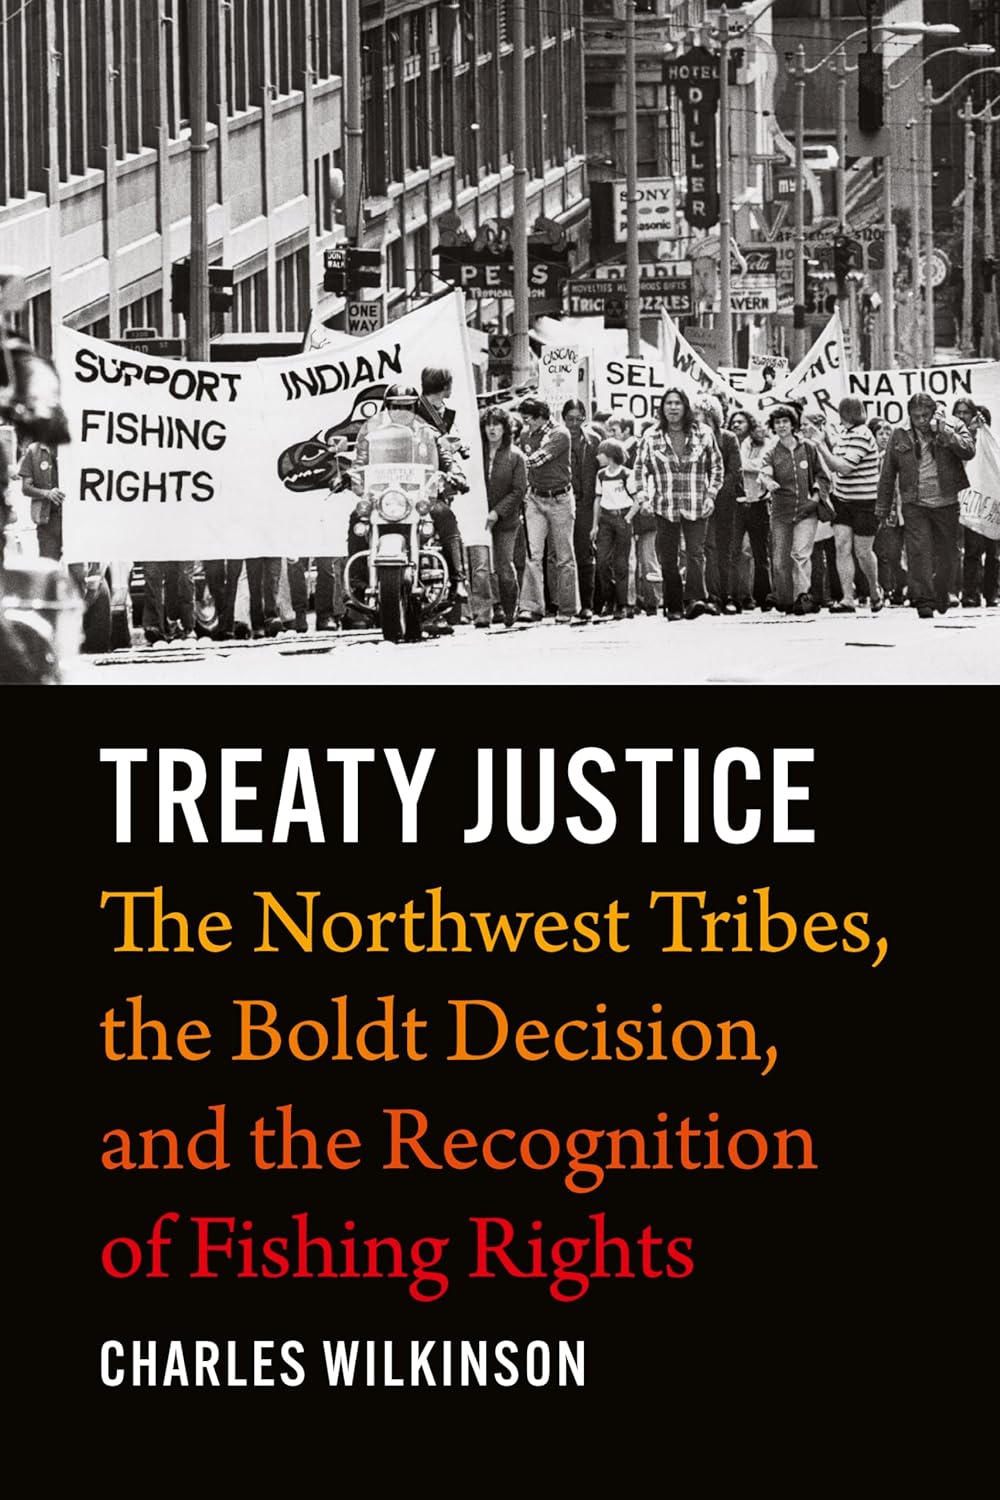 Treaty Justice: The Northwest Tribes, the Boldt Decision, and the Recognition of Fishing Rights by Charles Wilkinson